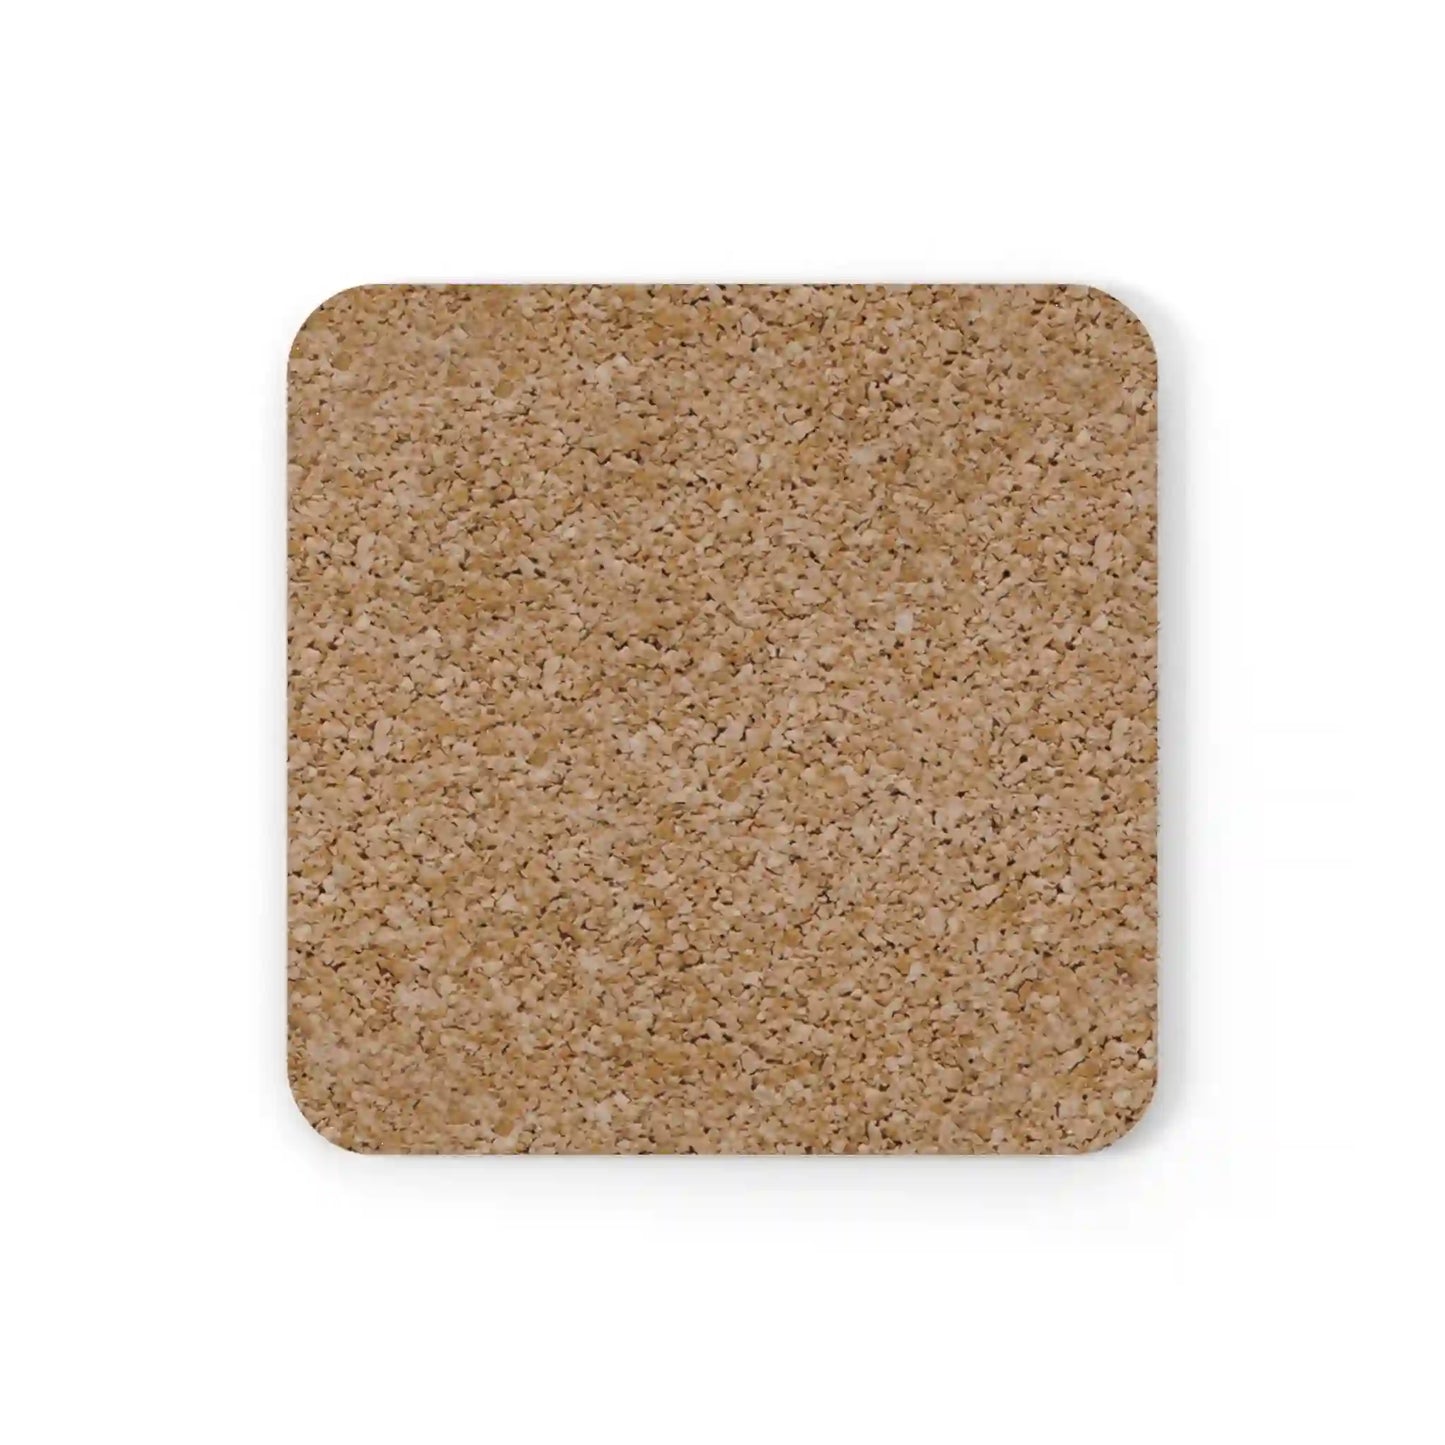 Non-slip premium cork coaster, furniture protection (My body, my choice, my rules)